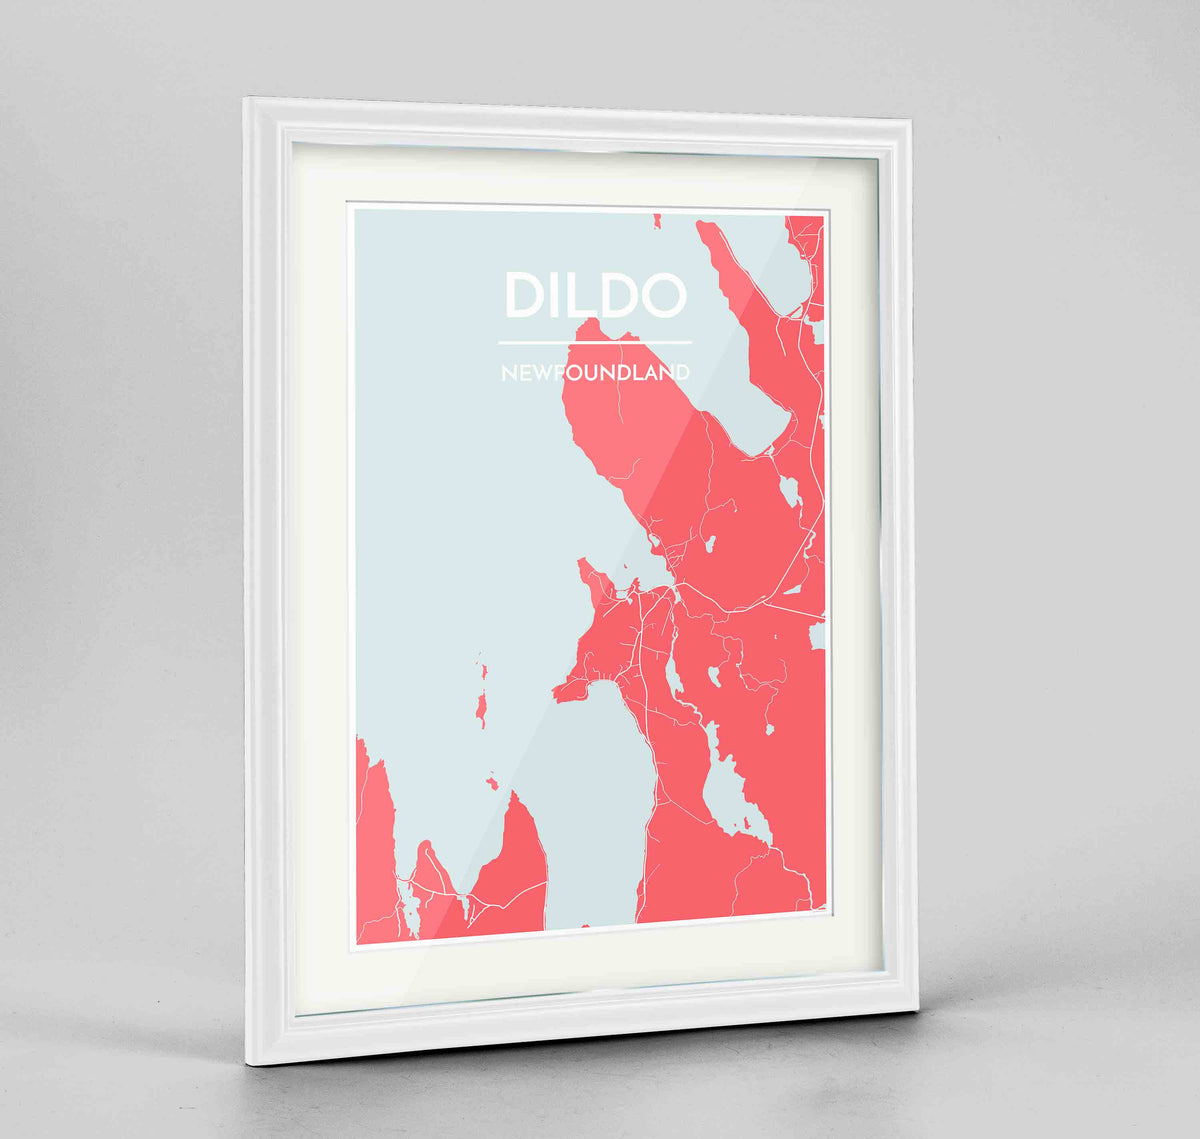 Framed Dildo Cove Map Art Print 24x36&quot; Traditional White frame Point Two Design Group